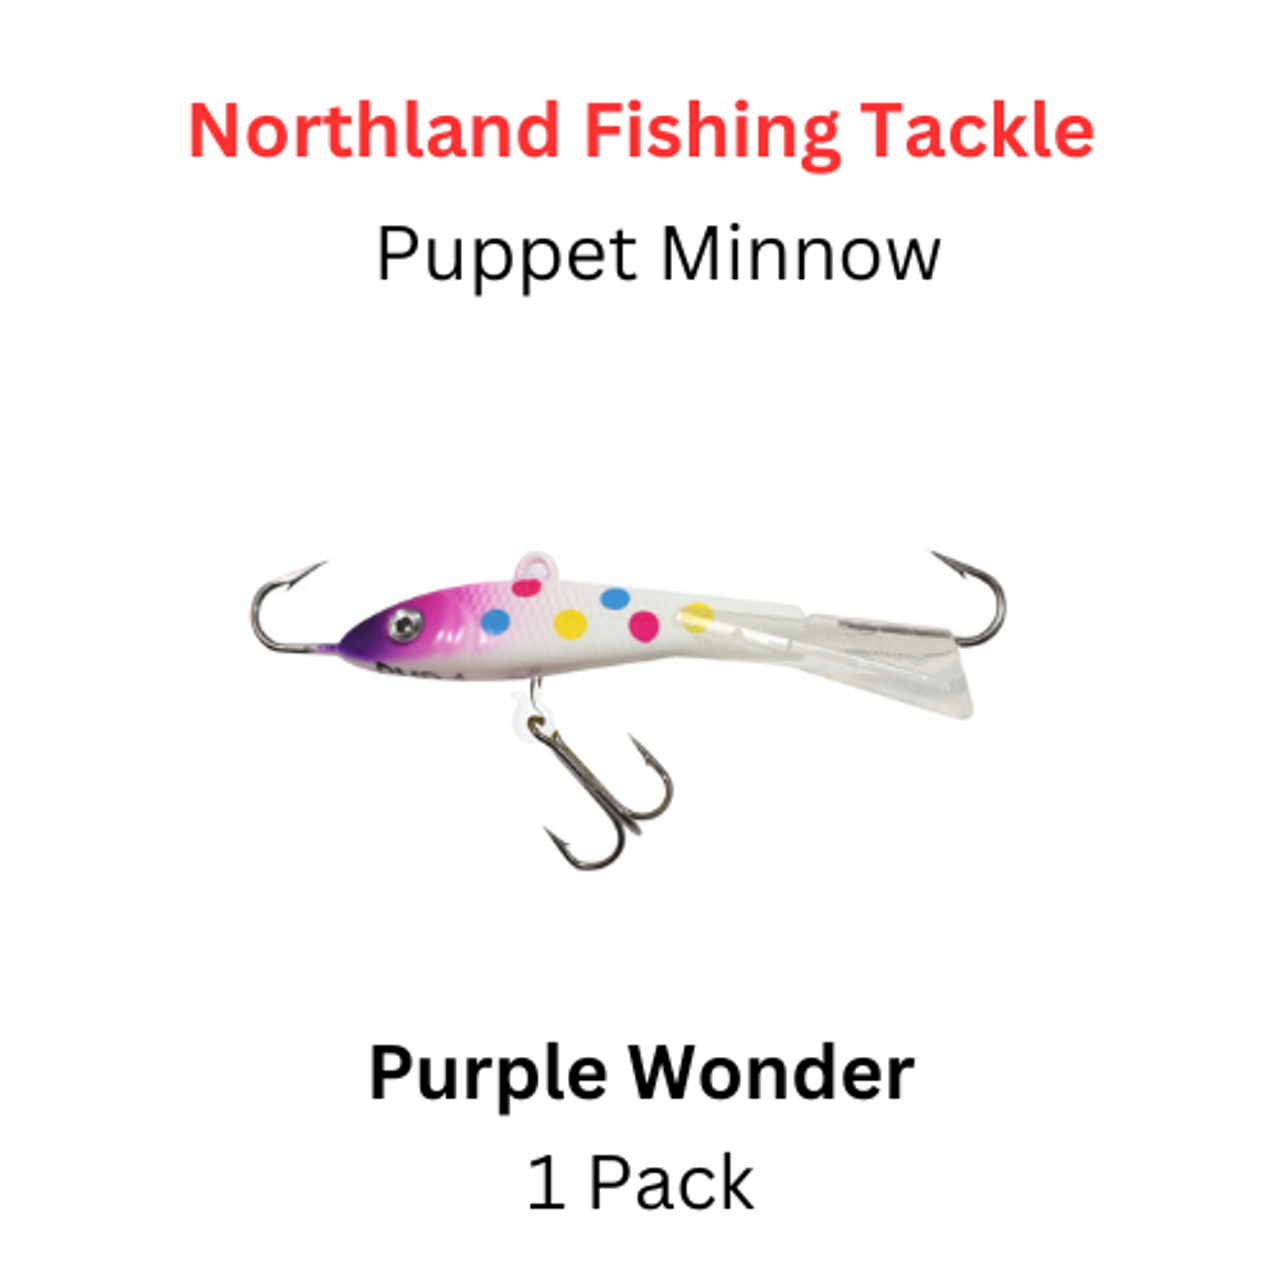 https://cdn11.bigcommerce.com/s-u9nbd/images/stencil/1280x1280/products/6186/15627/Northland_Fishing_Tackle_Puppet_Minnow_Purple_Wonder__95055.1676749409.png?c=2